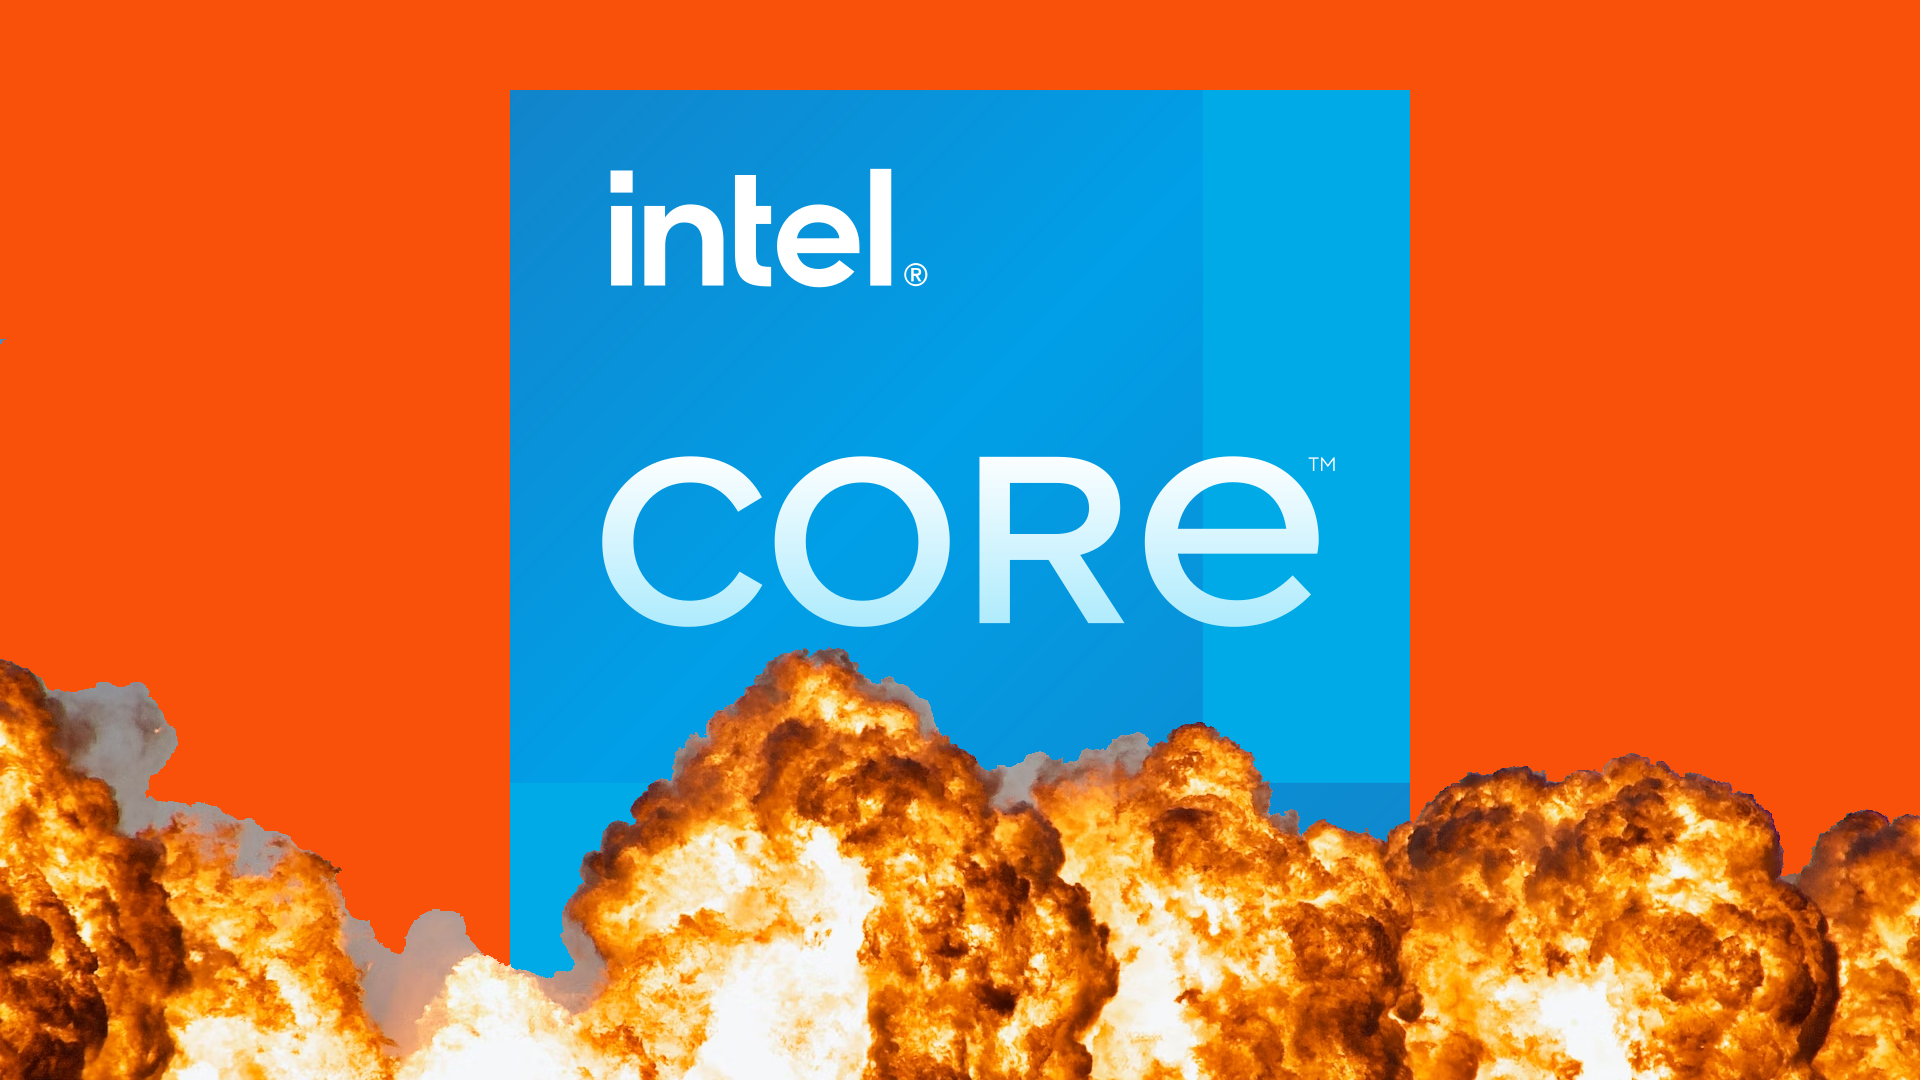 Intel Core i7 14700K specs leak could blow AMD's high end CPUs away